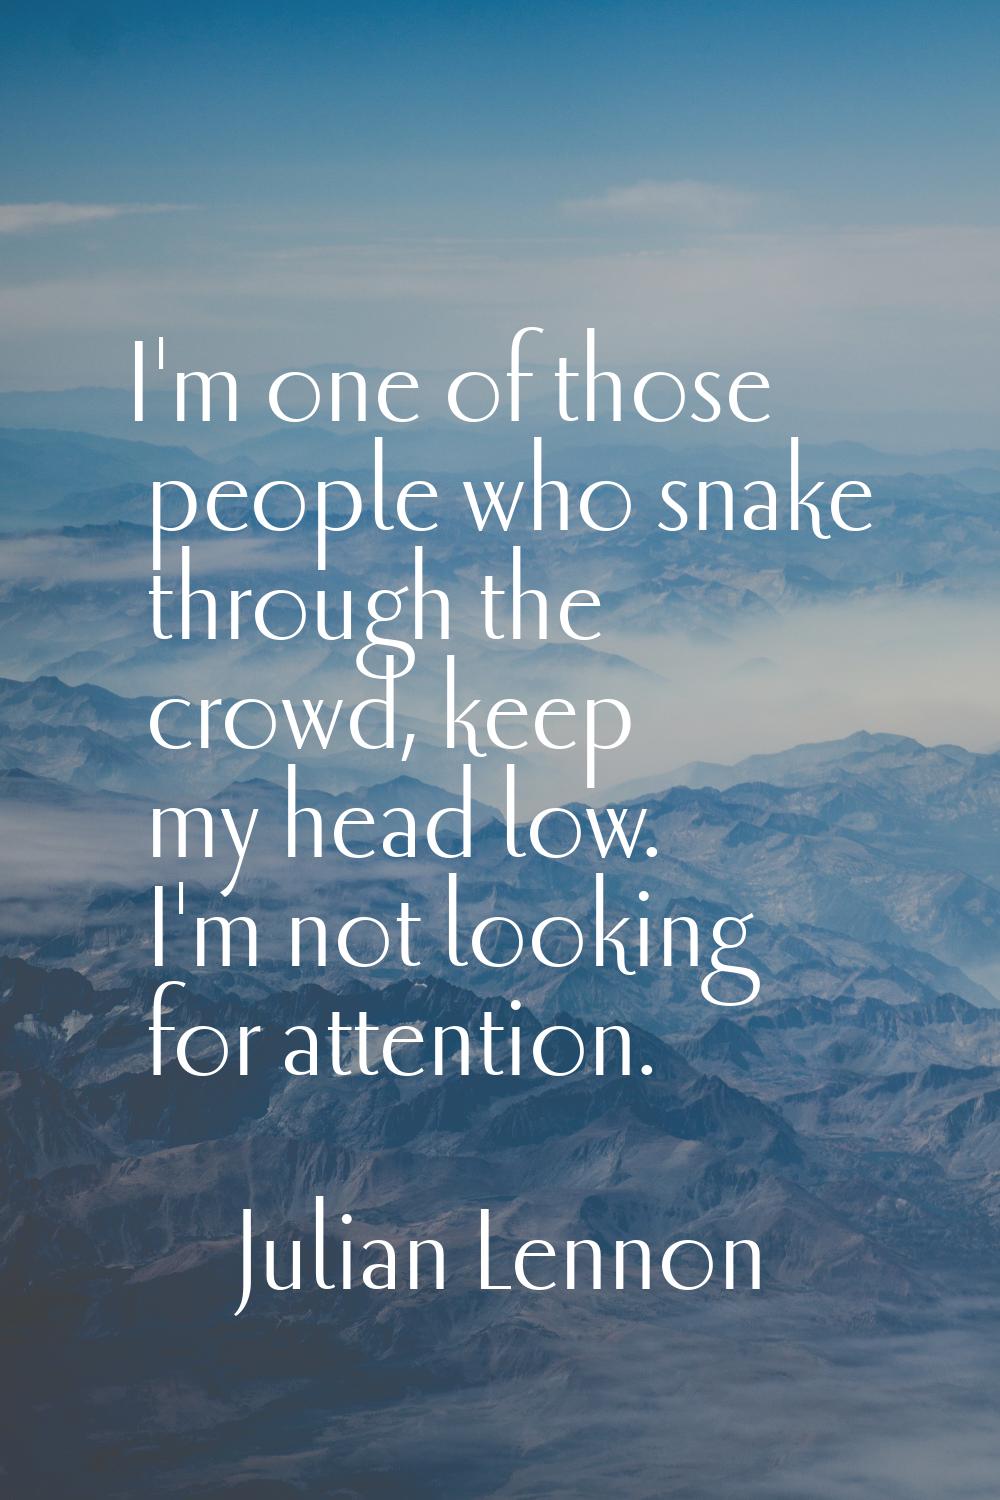 I'm one of those people who snake through the crowd, keep my head low. I'm not looking for attentio